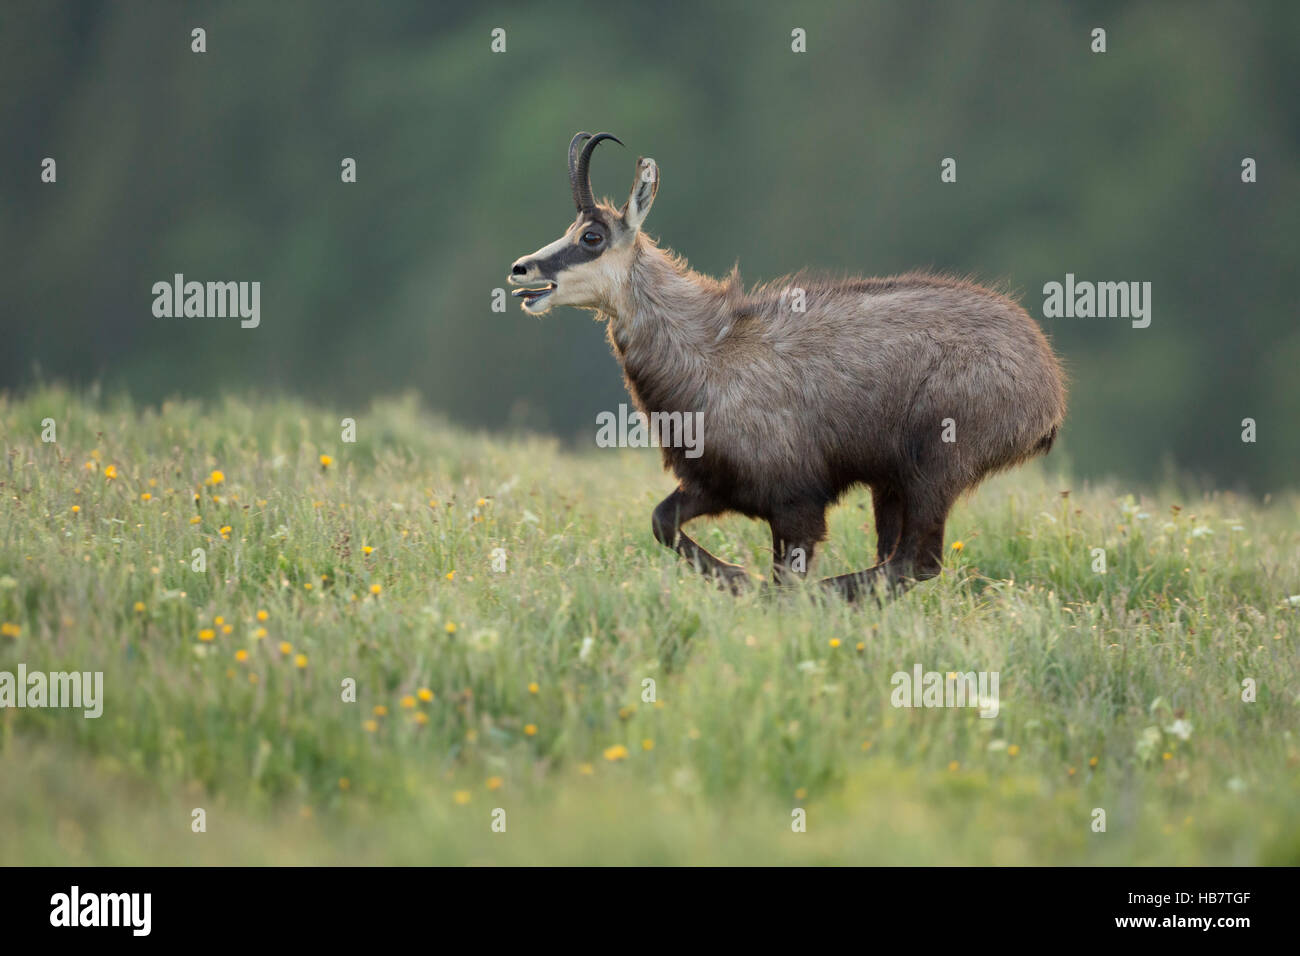 Alpine Chamois / Gaemse ( Rupicapra rupicapra ) on the run, running over a flowering mountain meadow, seems to be exhausted. Stock Photo